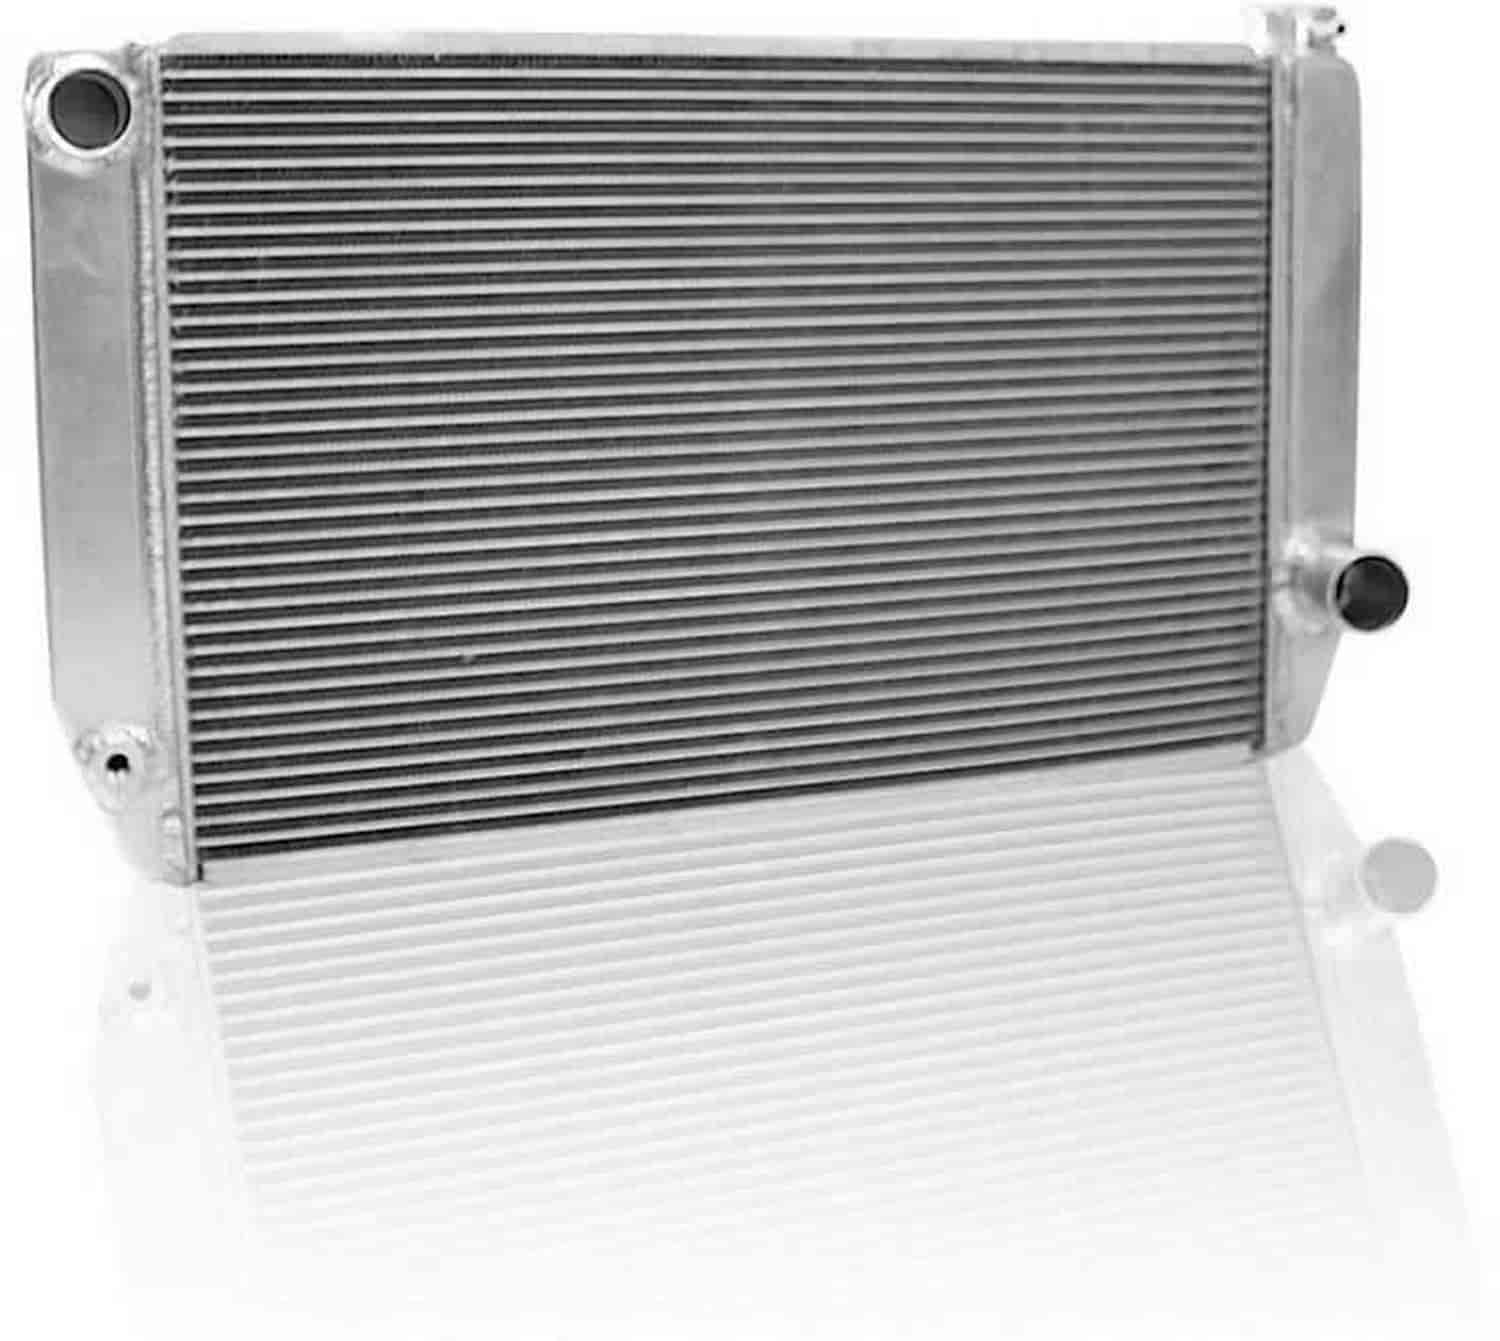 MegaCool Universal Fit Radiator Single Pass Crossflow Design 27.50" x 15.50" with Straight Outlet